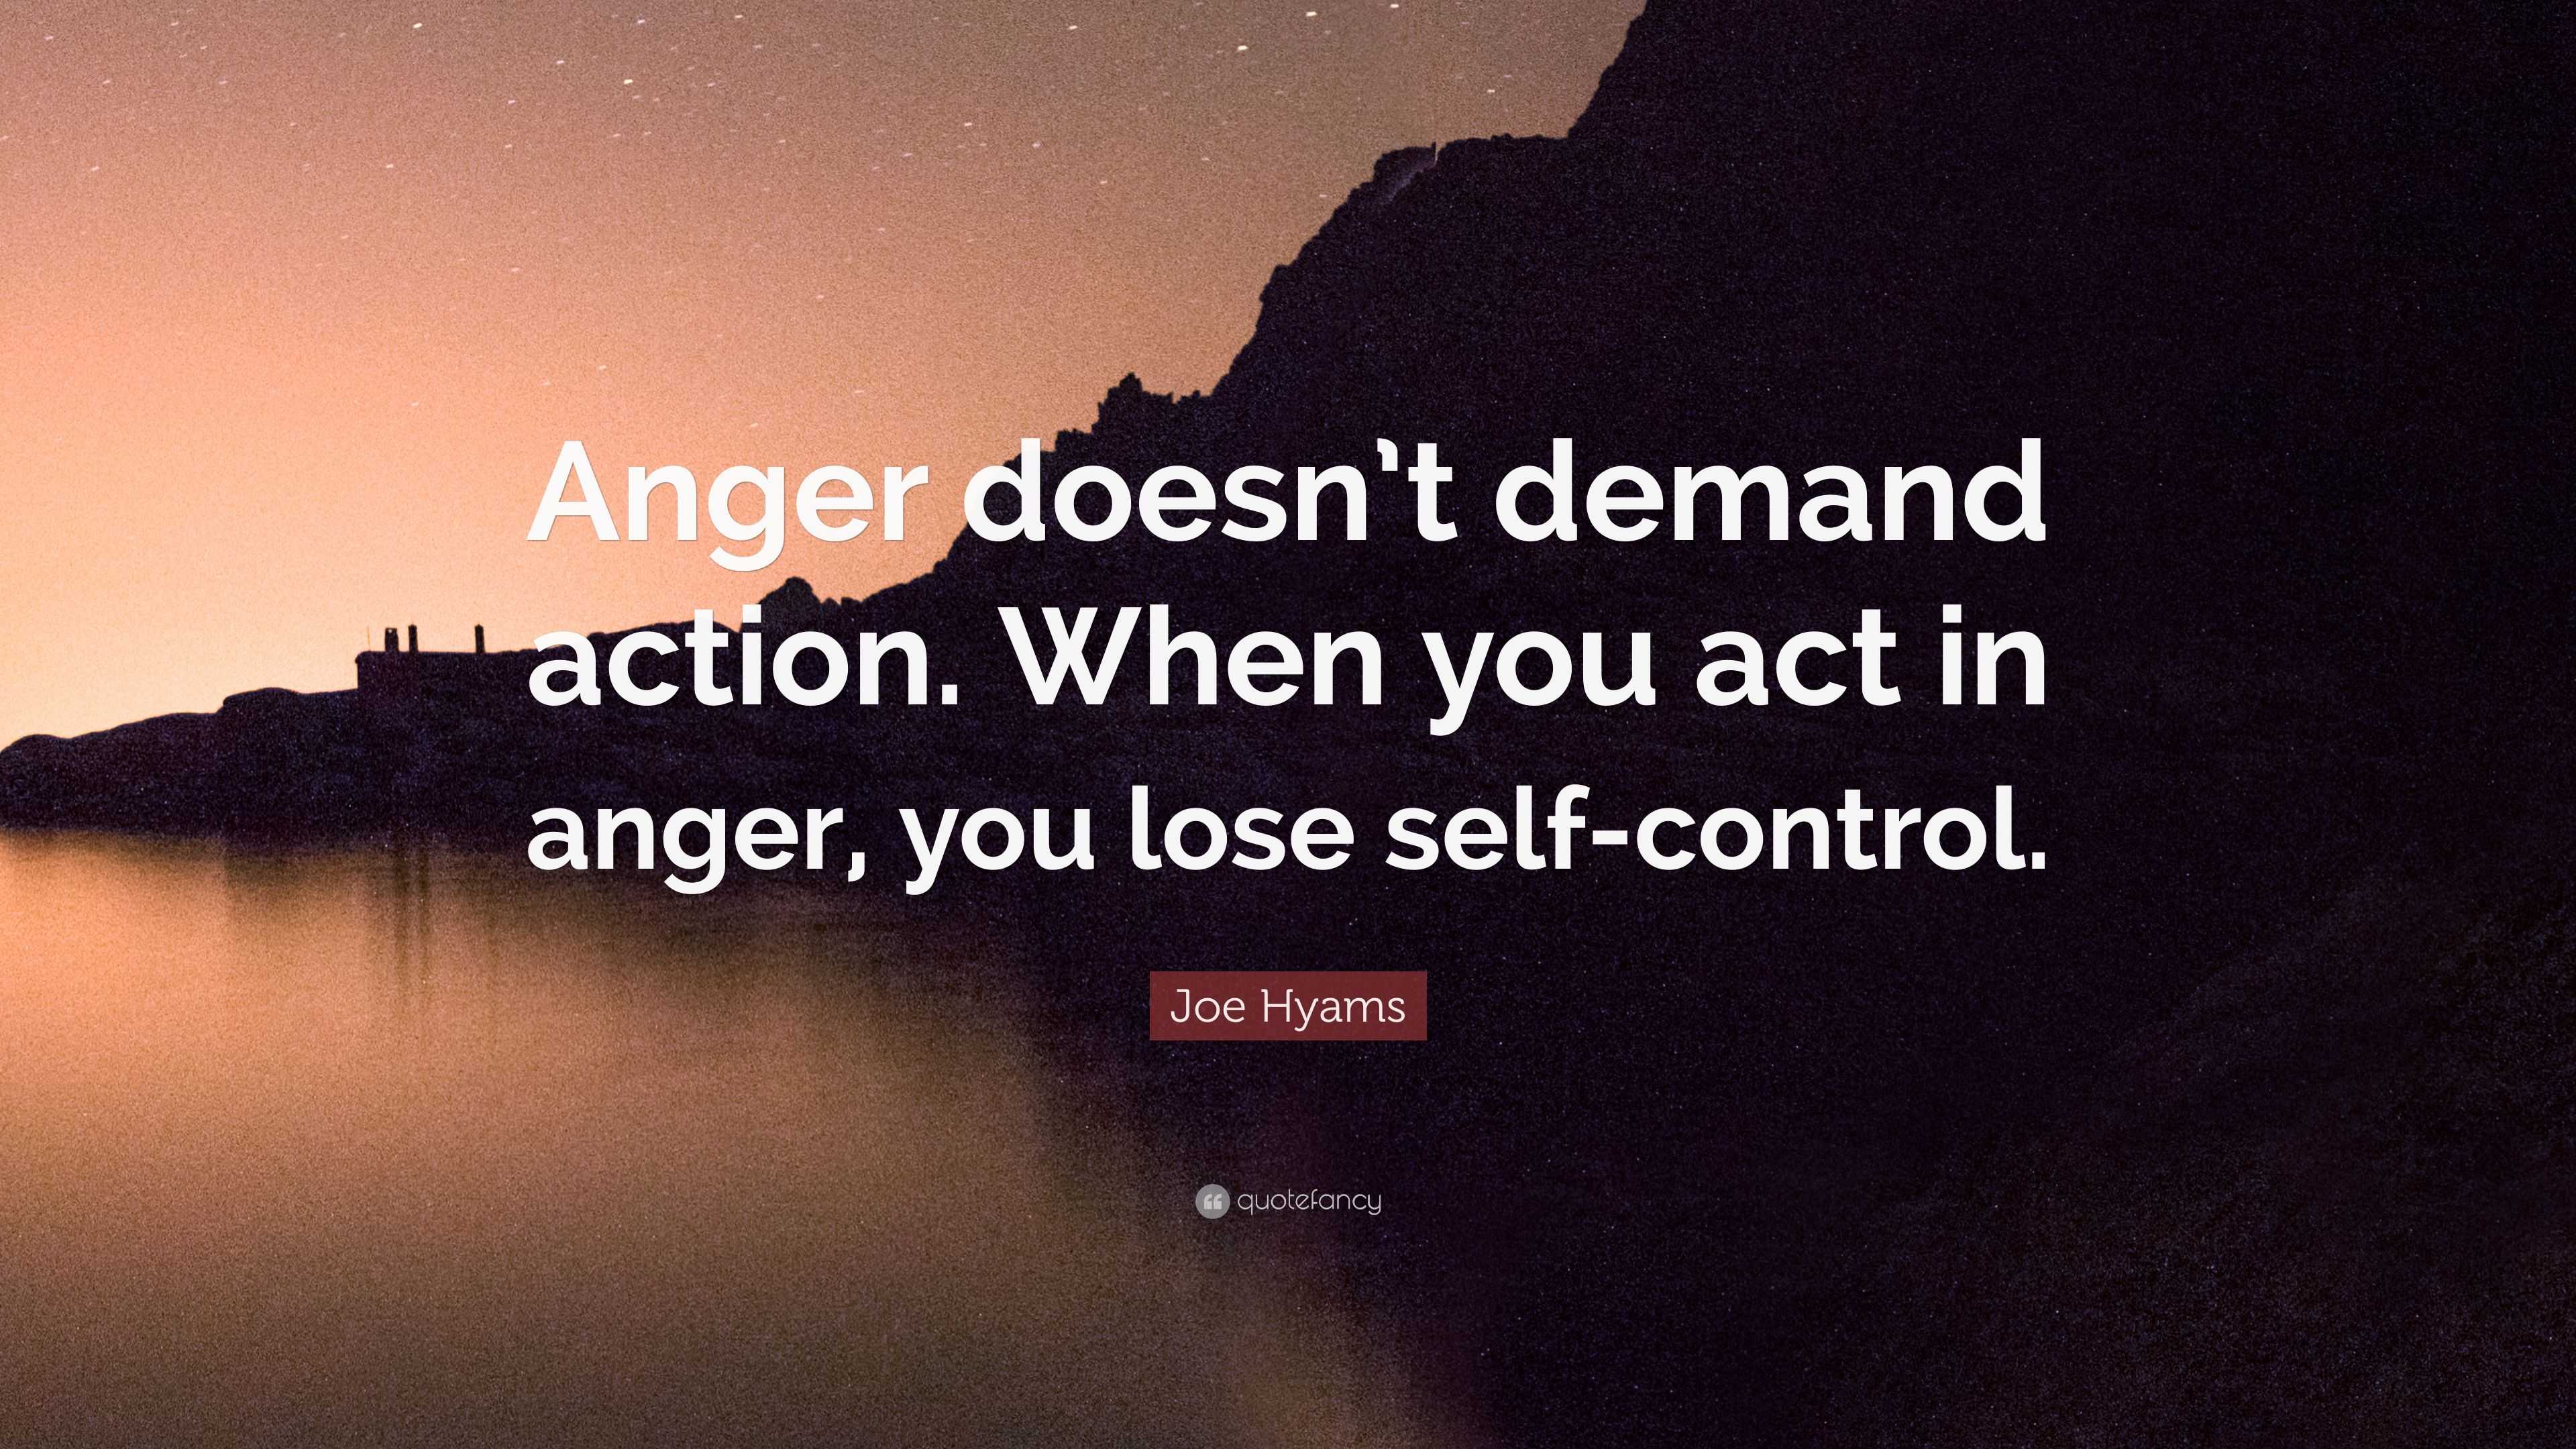 Joe Hyams Quote “Anger doesn’t demand action. When you